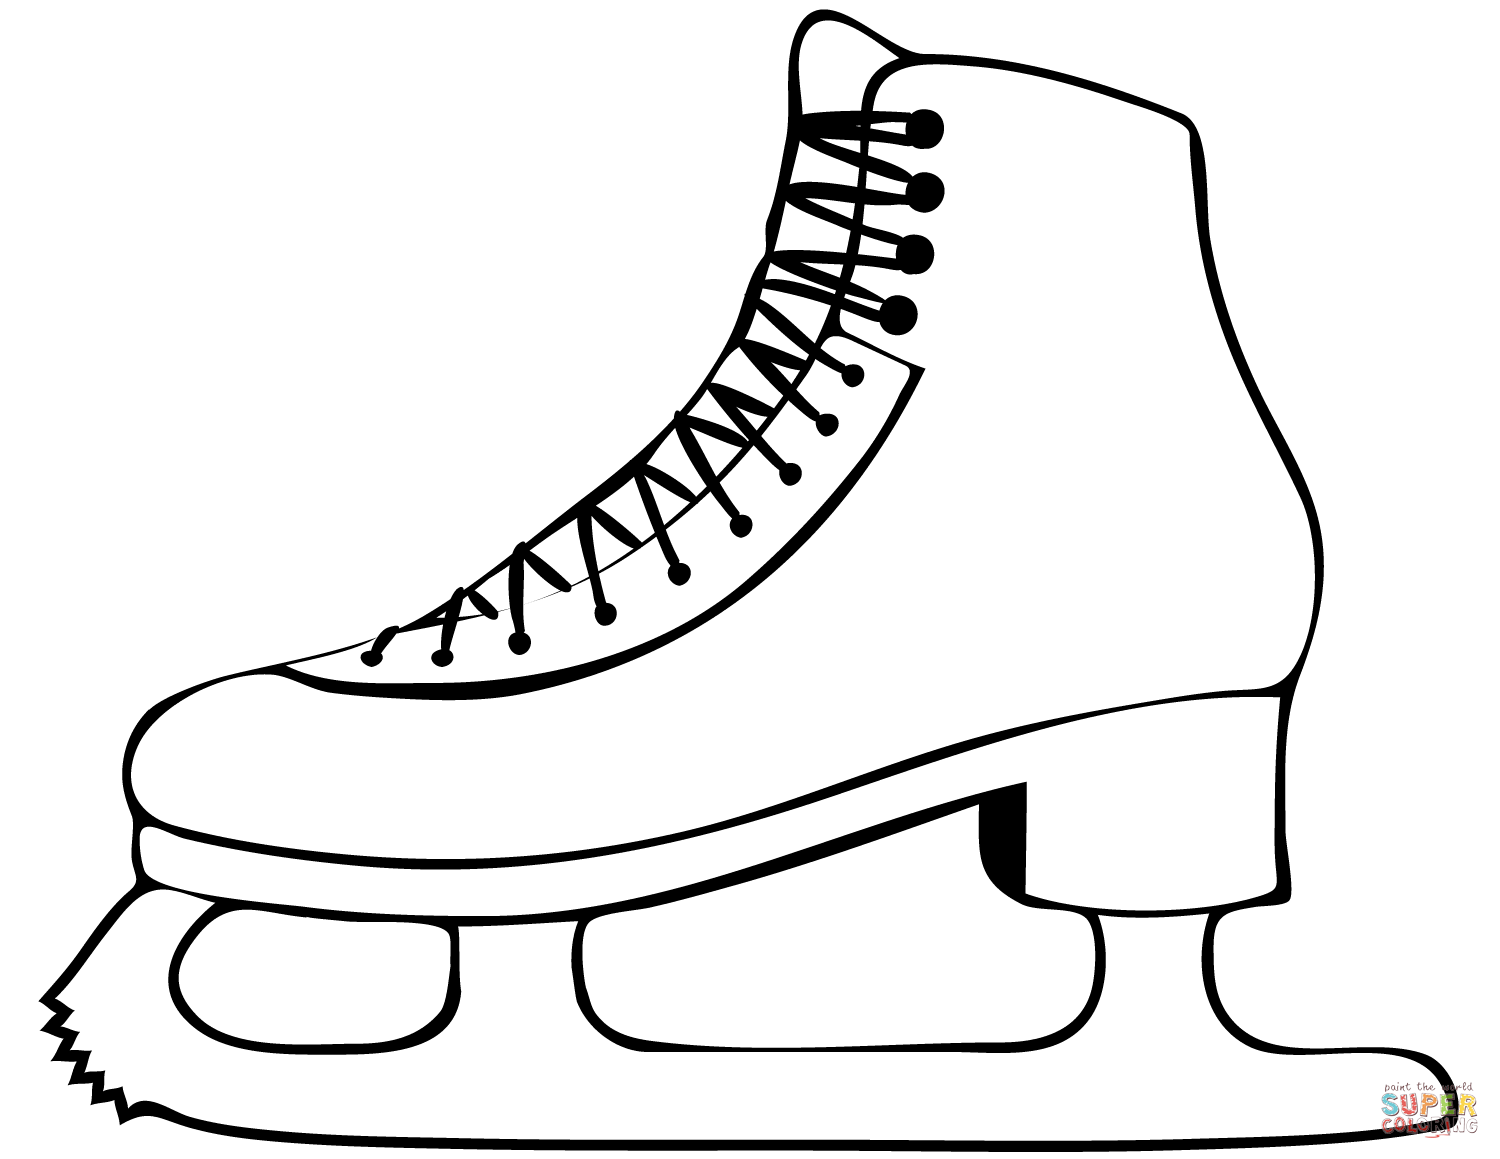 Ice Skate coloring page | Free Printable Coloring Pages